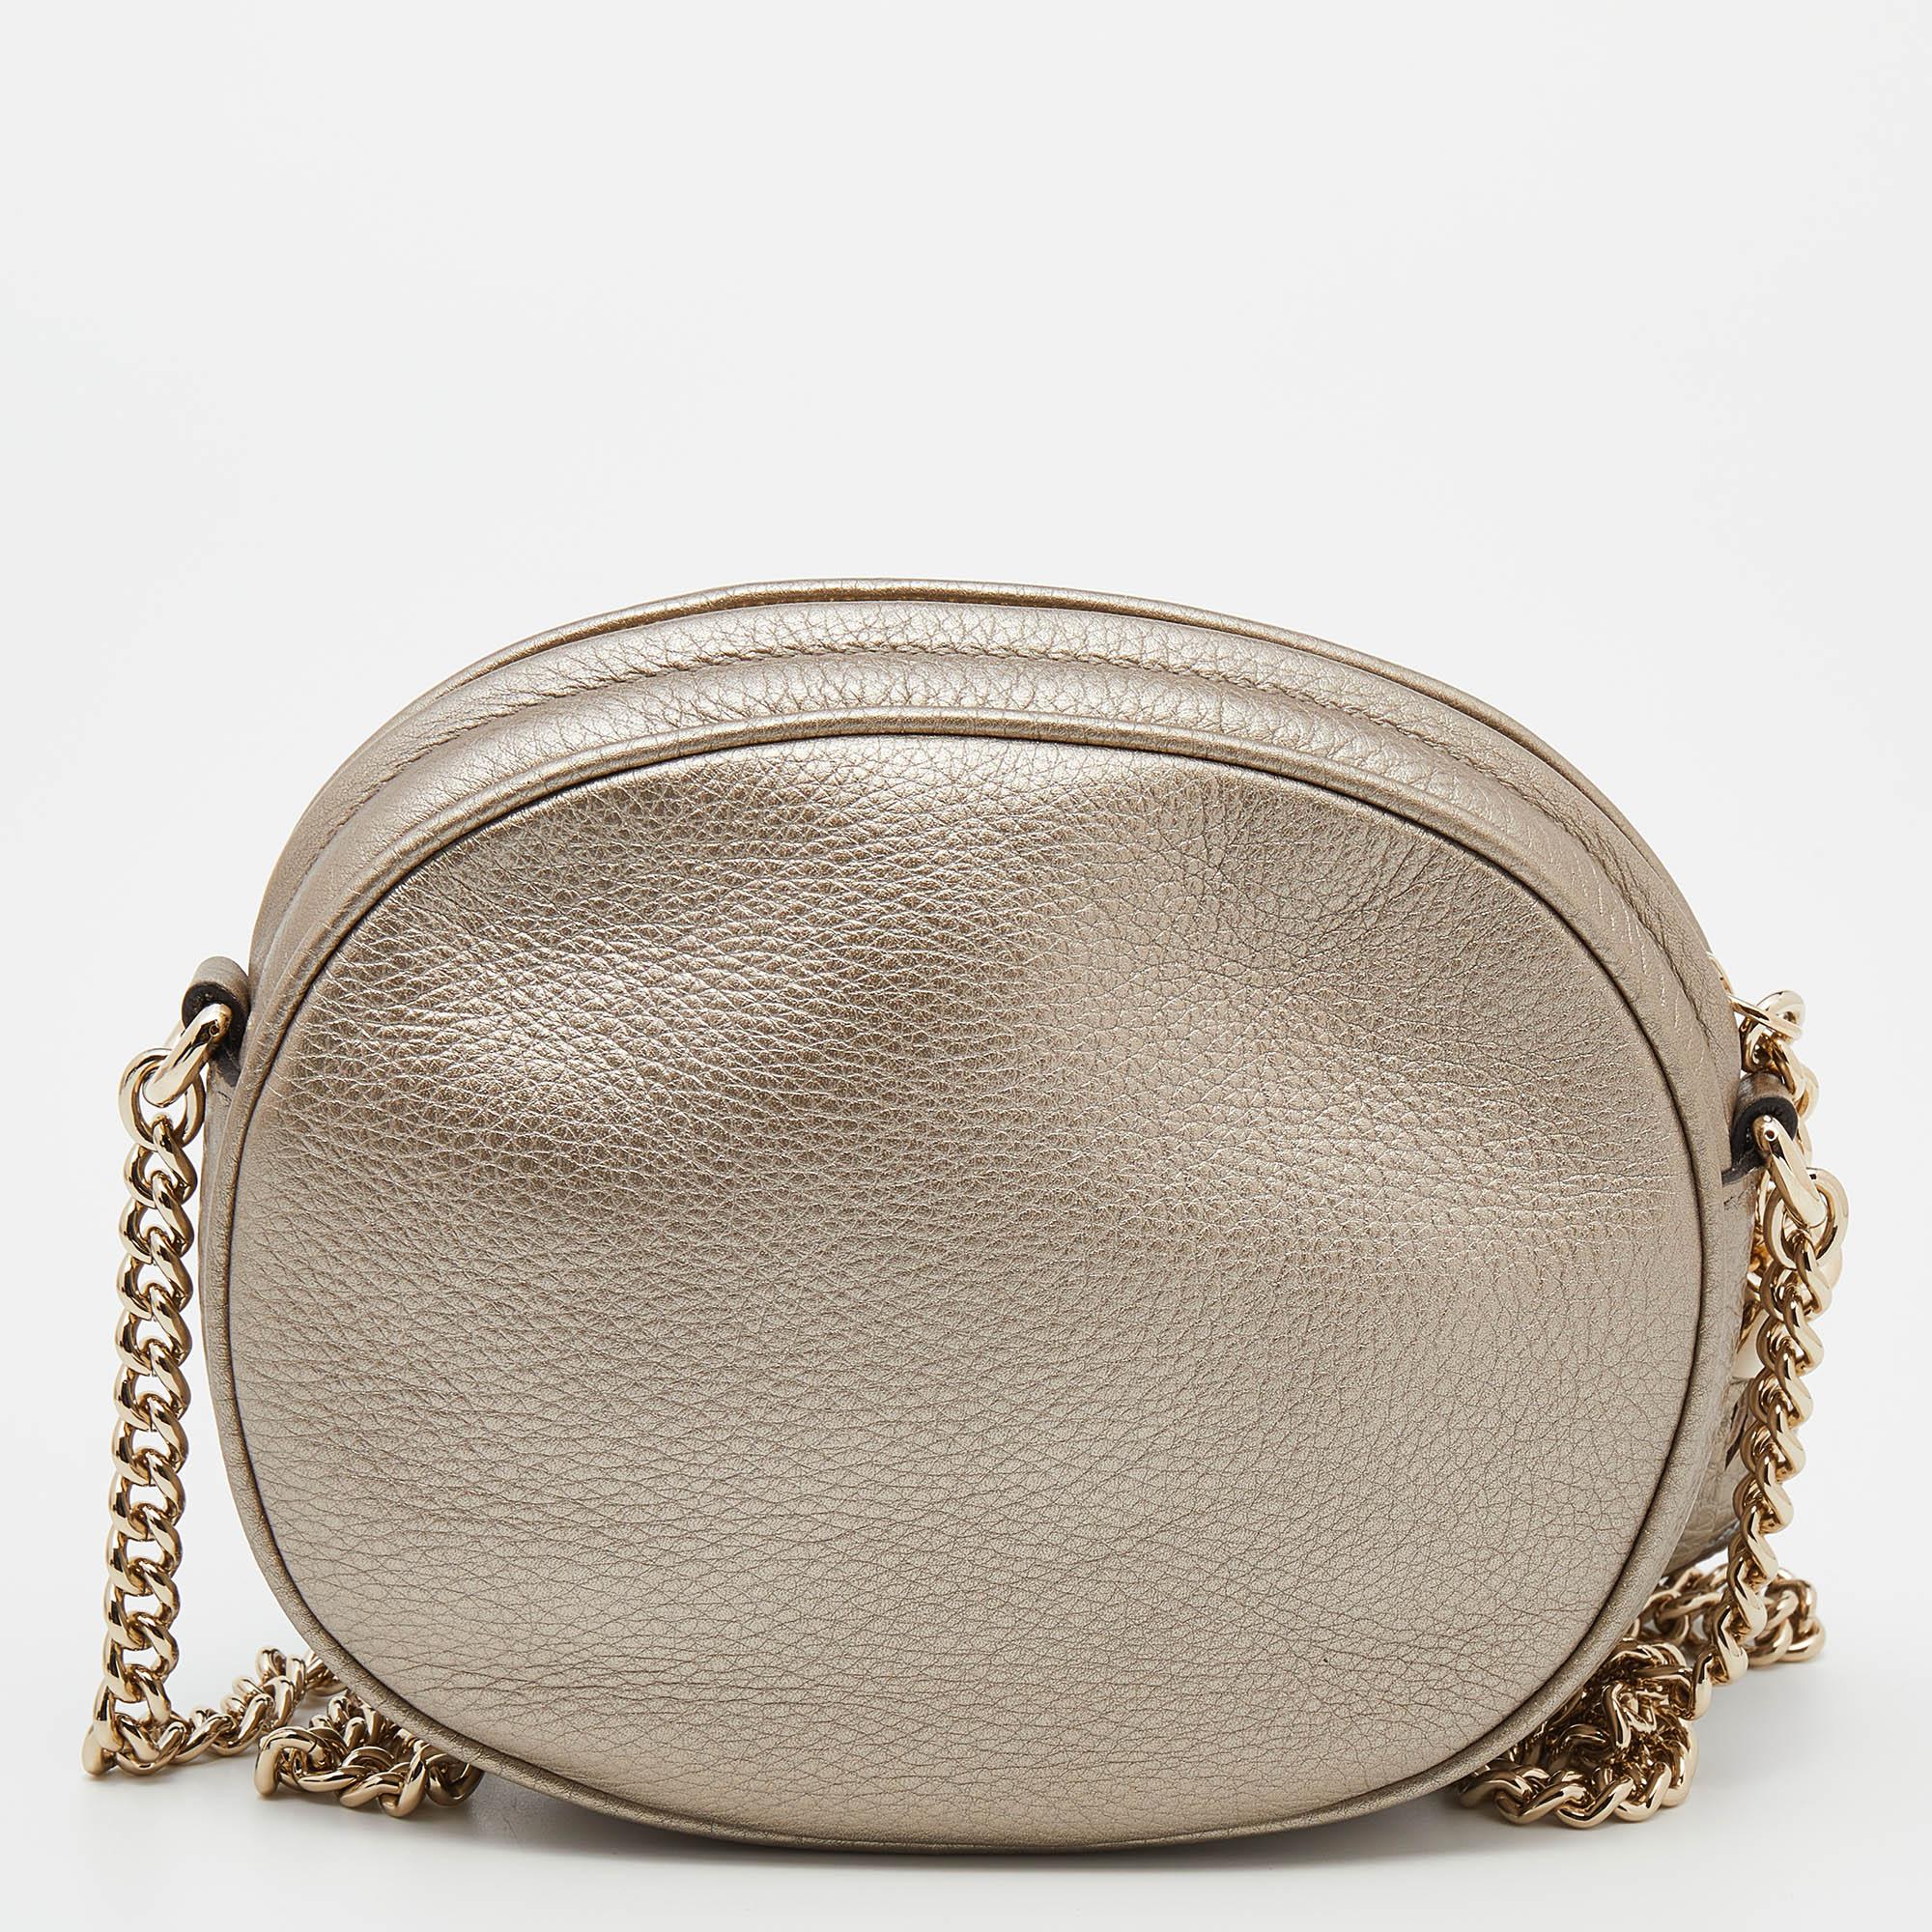 Gucci's expertise in creating noteworthy designs is evident in this Mini Soho bag. It gets a luxe update with a brand motif on the front and it is adorned with a chain shoulder strap and tassel charms. Lined with fabric, it can neatly house your